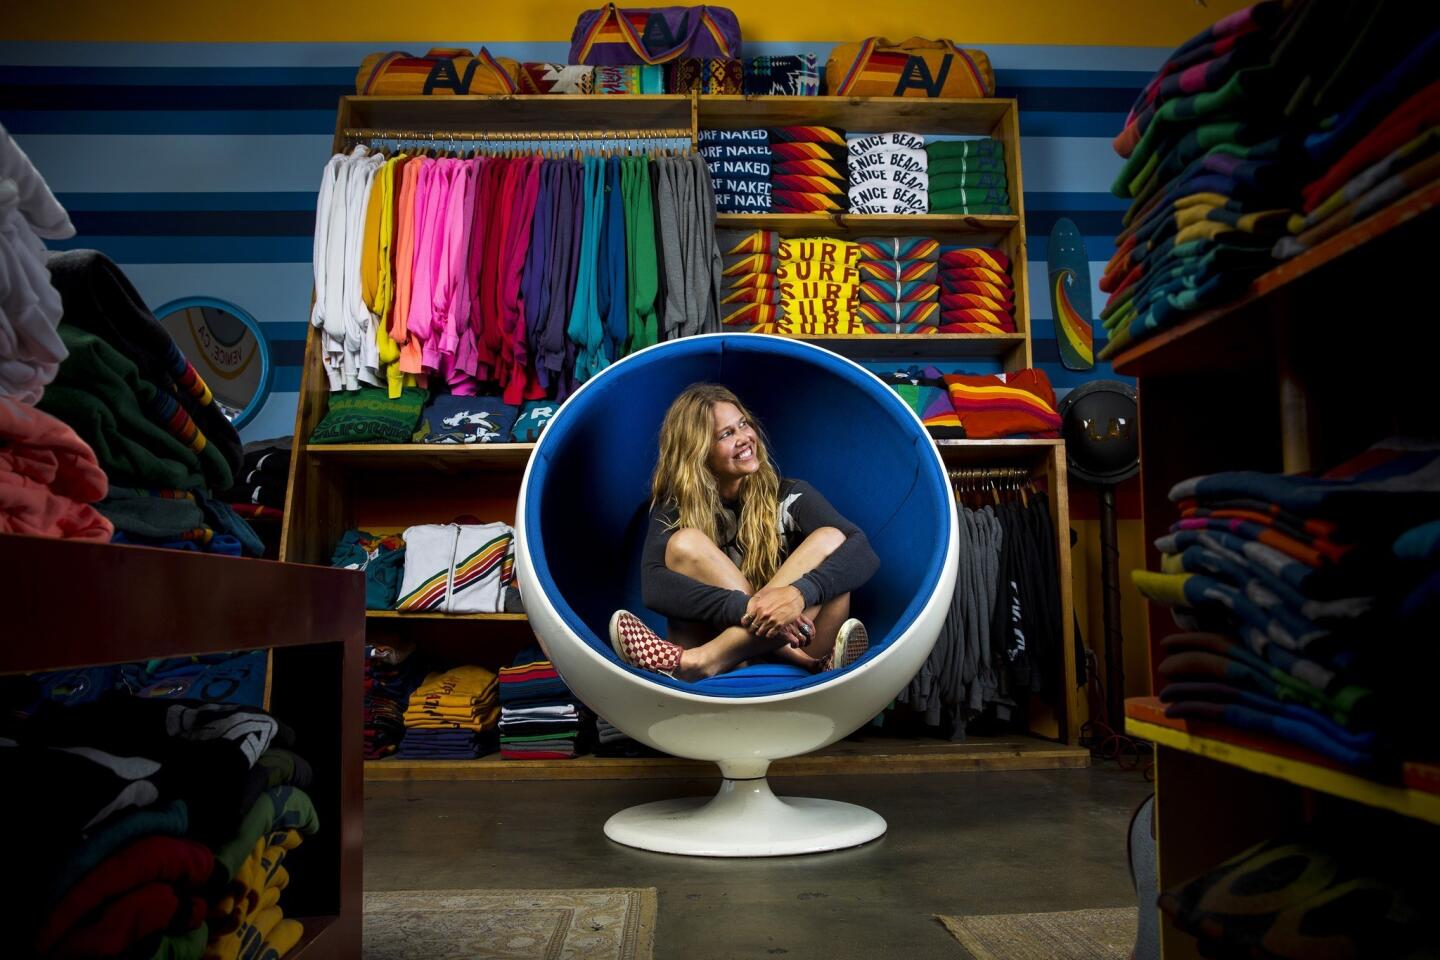 Paige Mycoskie, designer and founder of Venice-based Aviator Nation clothing line, is photographed inside her flagship store on Abbott Kinney in Venice.